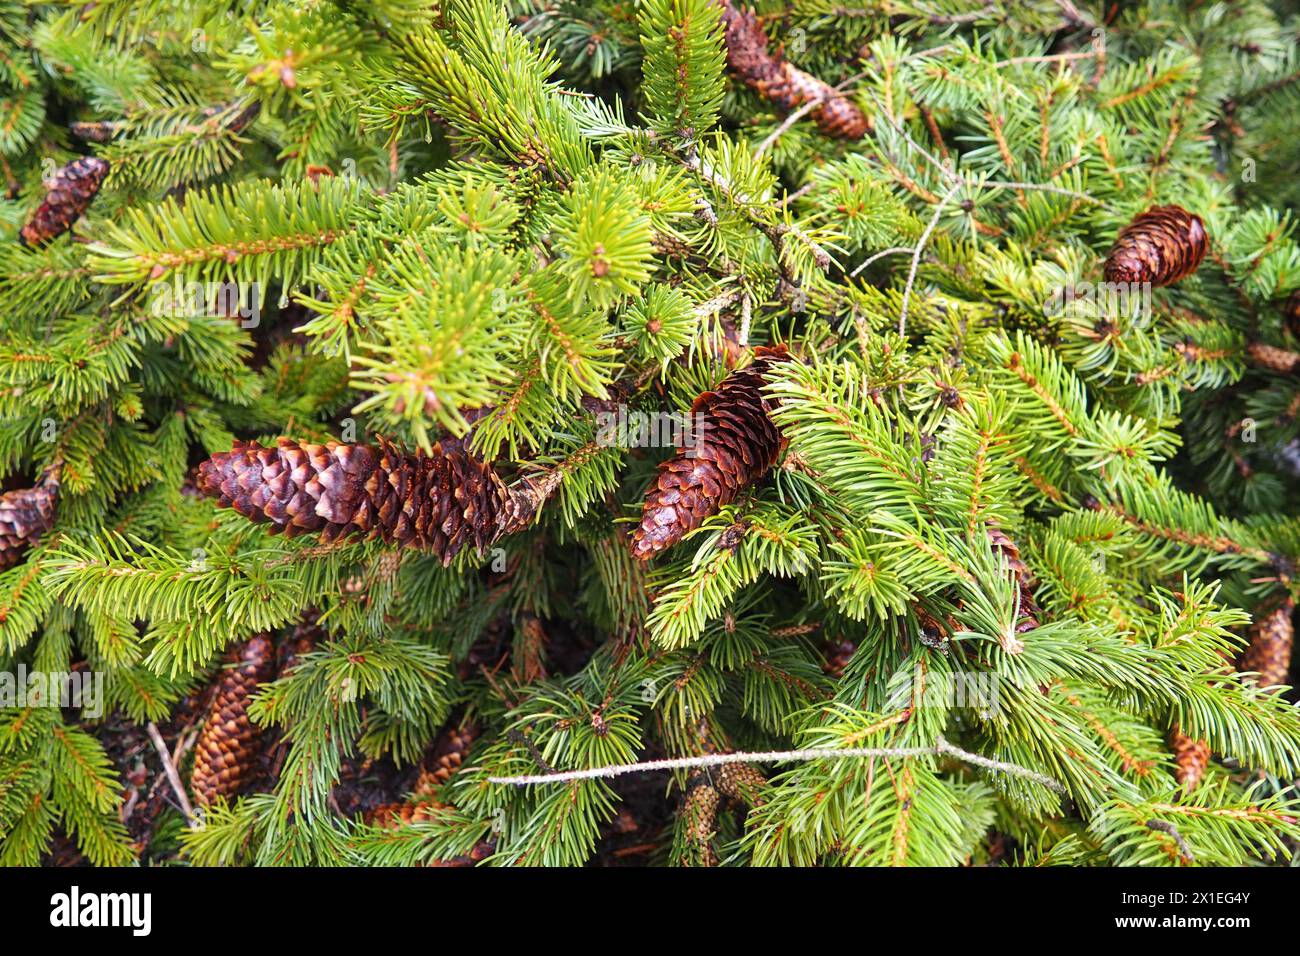 Needles and cones. Picea abies, Norway or European spruce, is a species native to Europe. Norway spruce is a large, fast-growing evergreen coniferous Stock Photo